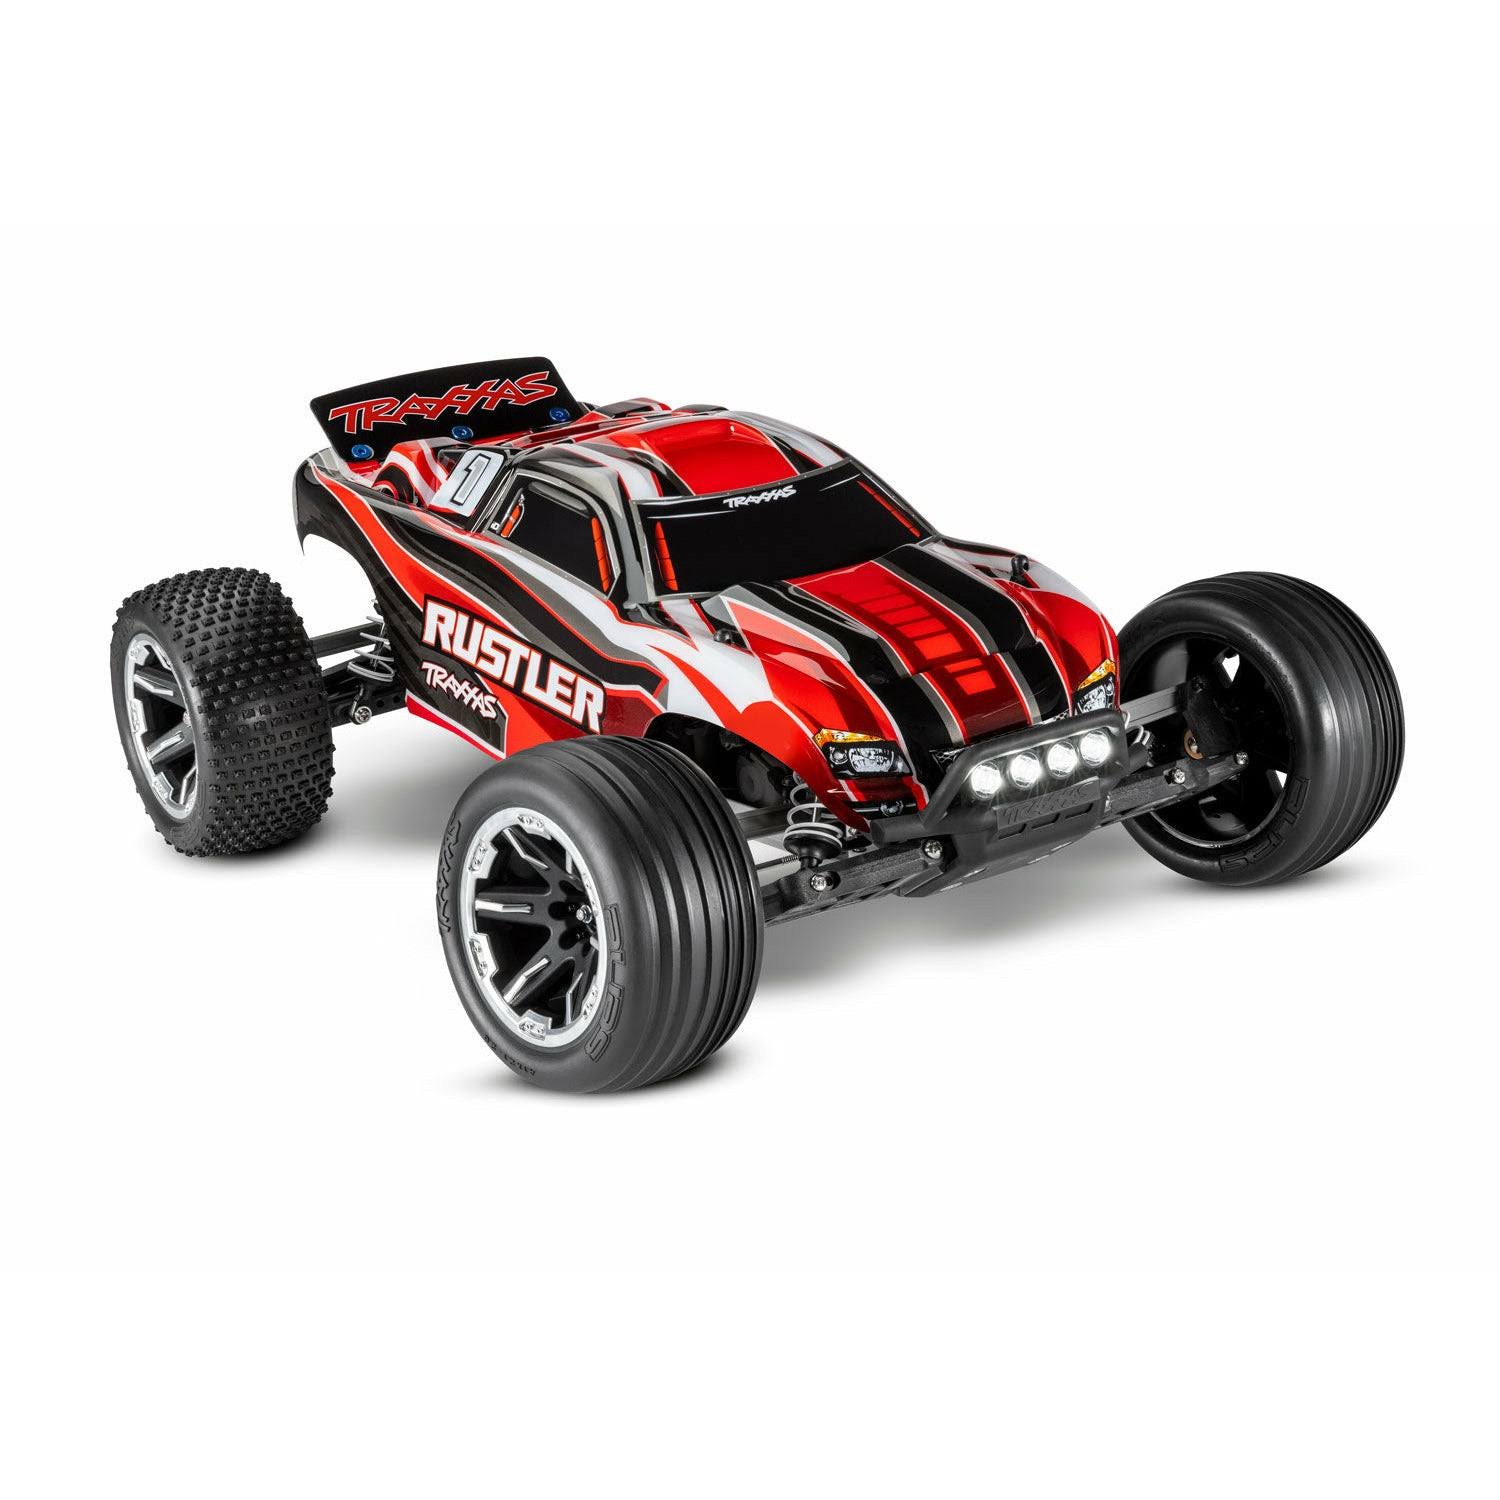 Traxxas 1/10 Rustler 2WD Stadium Truck, RTR with Led Lights Red